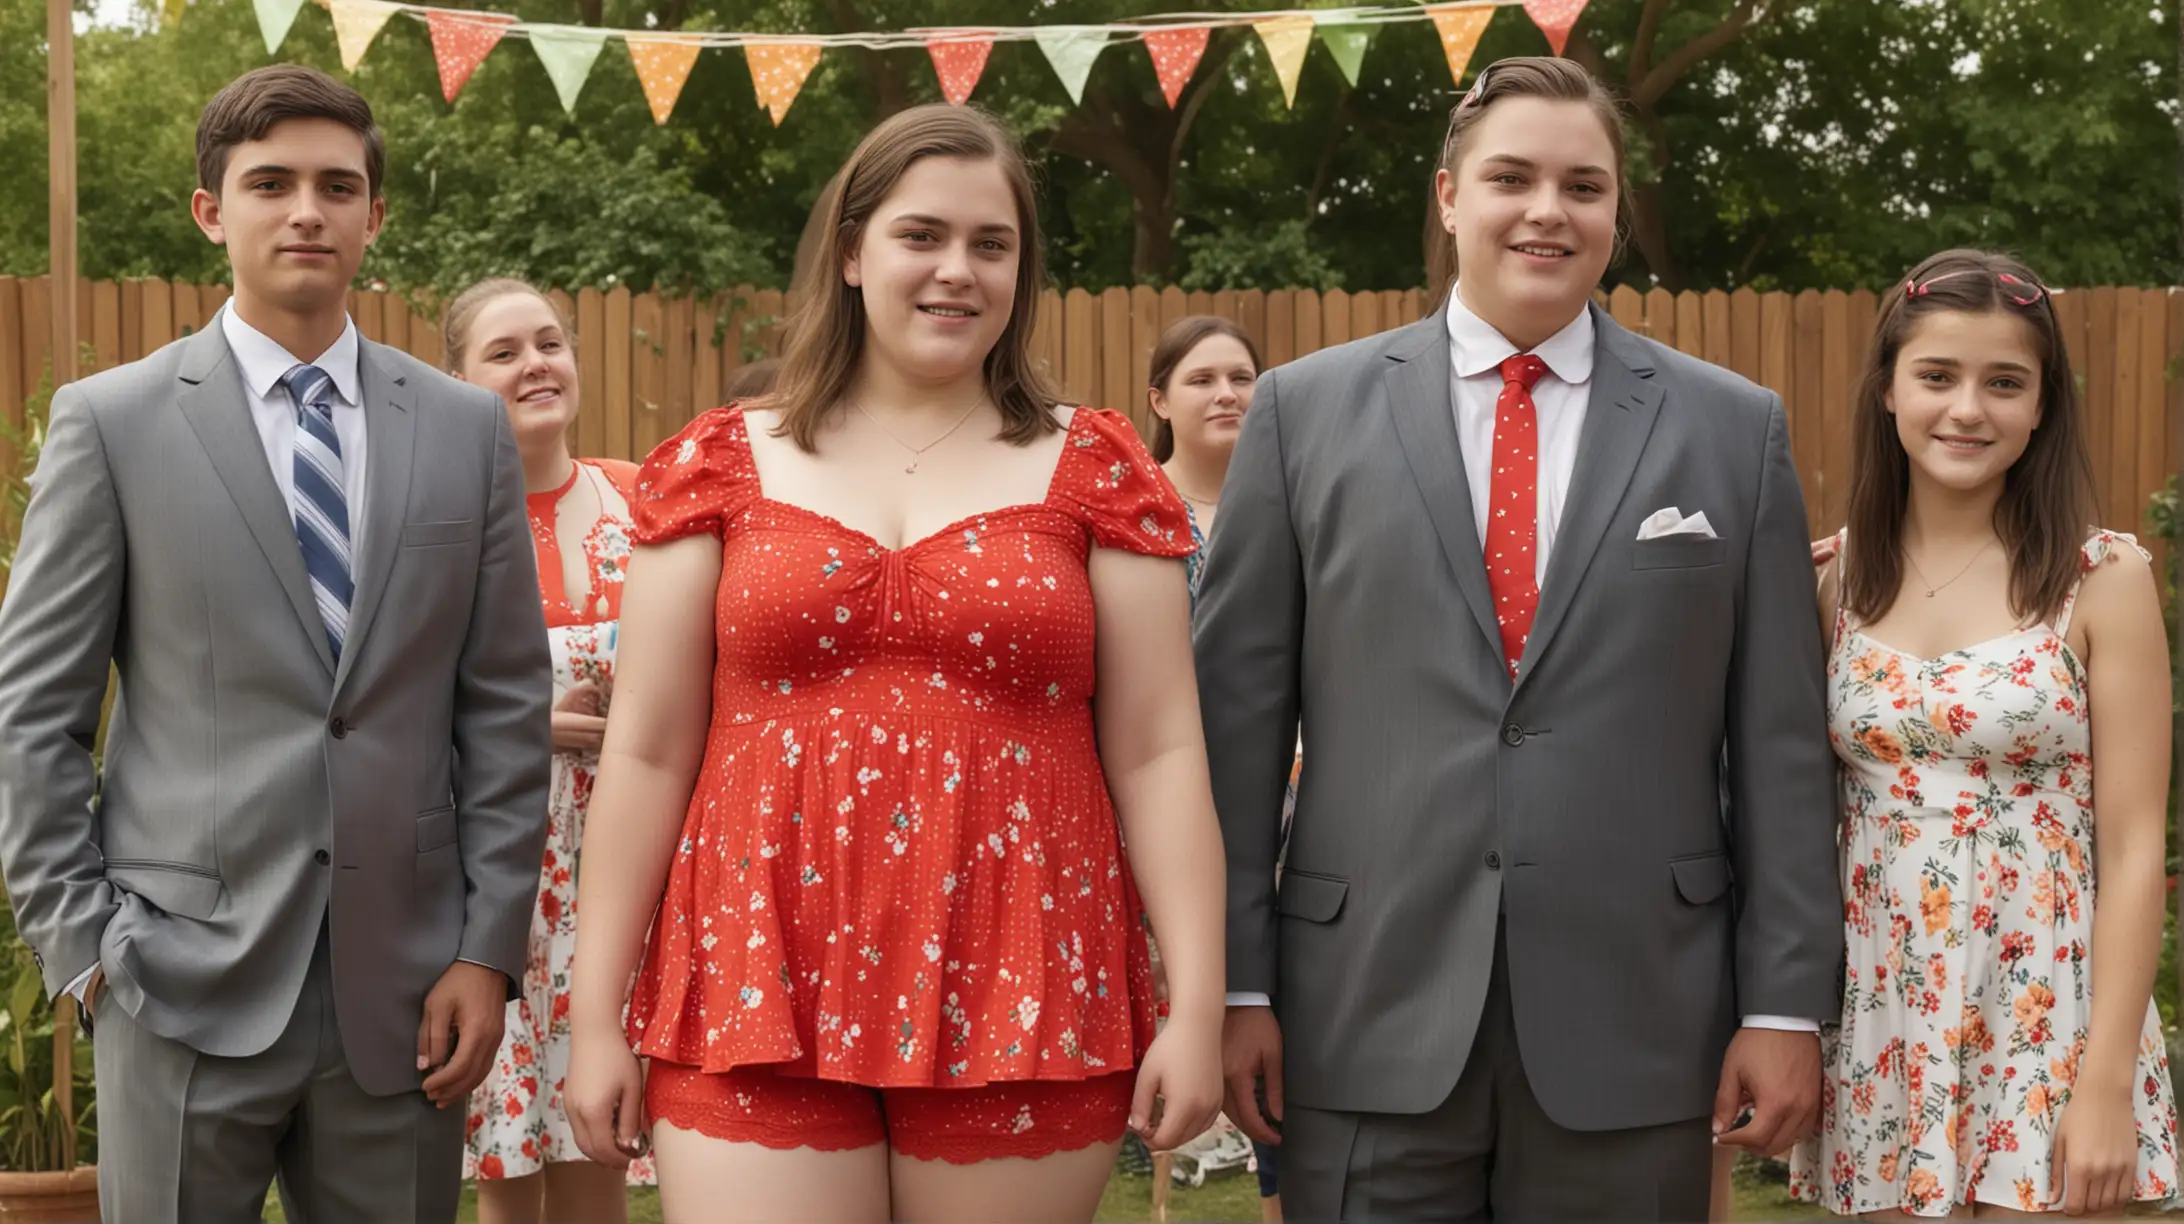 A photo-realistic picture of a family reunion, on the left stand two men in suits, in the middle stands a 16-year-old girl with moderate intellectual disabilities who is dressed in a summer top and red panties, the disability can be seen on her face, on the right stand two women wearing a party dress.